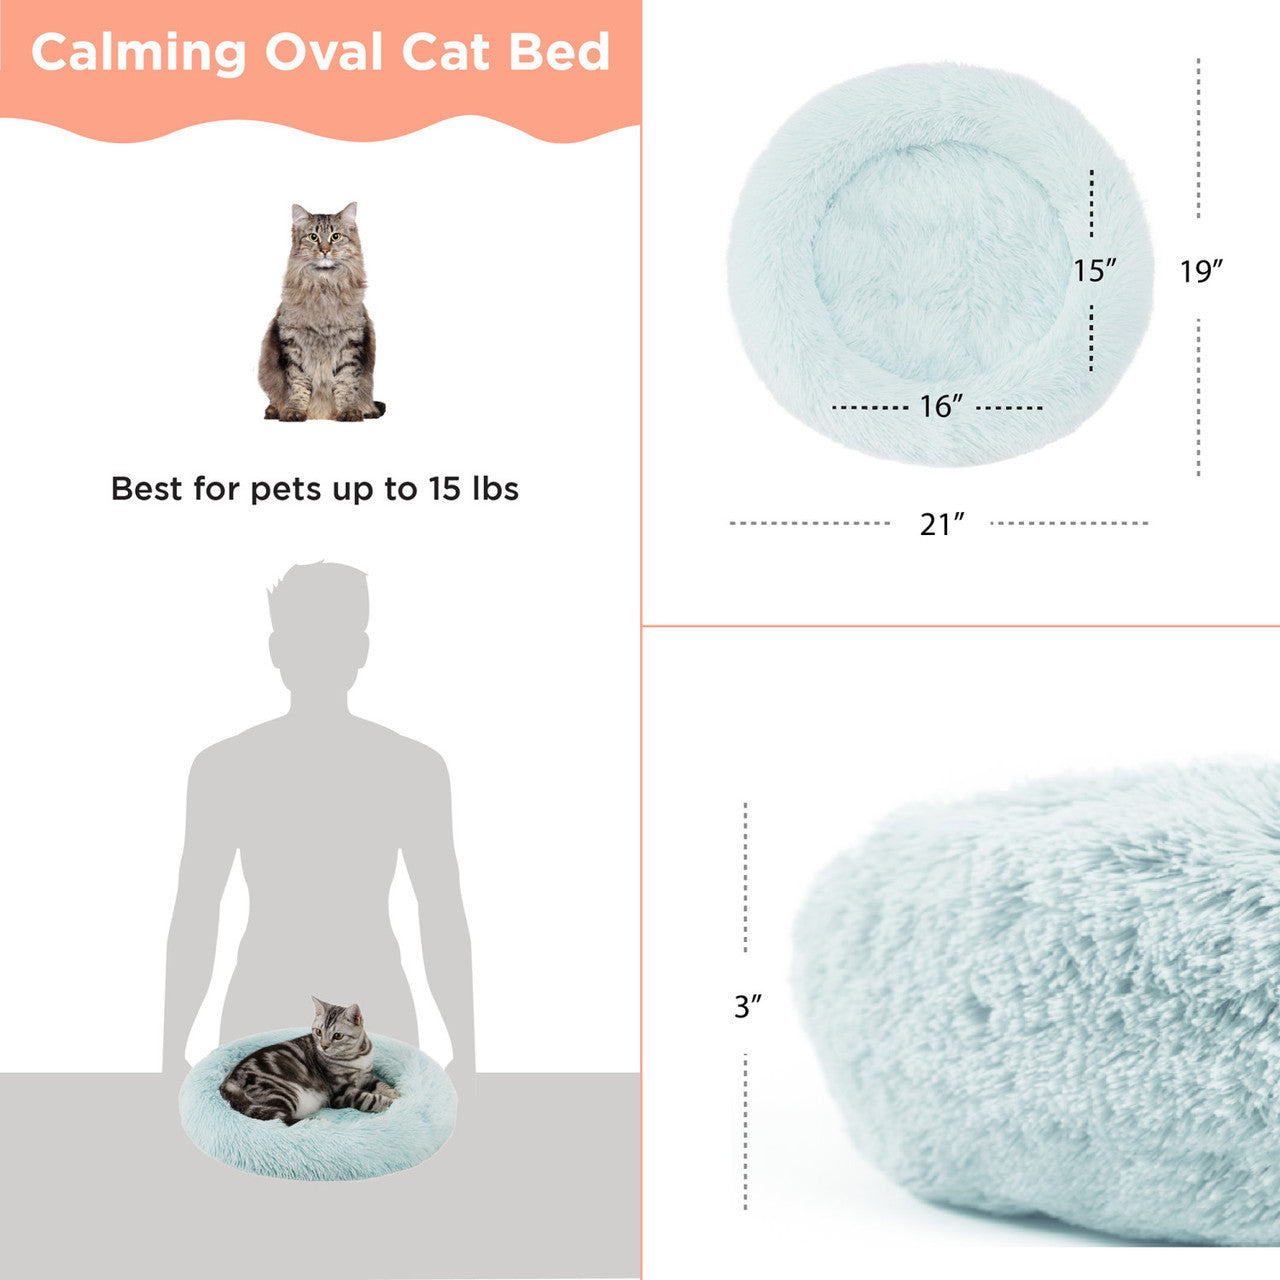 Outward Hound - Calming Oval Cat Bed Pad 21"x19"